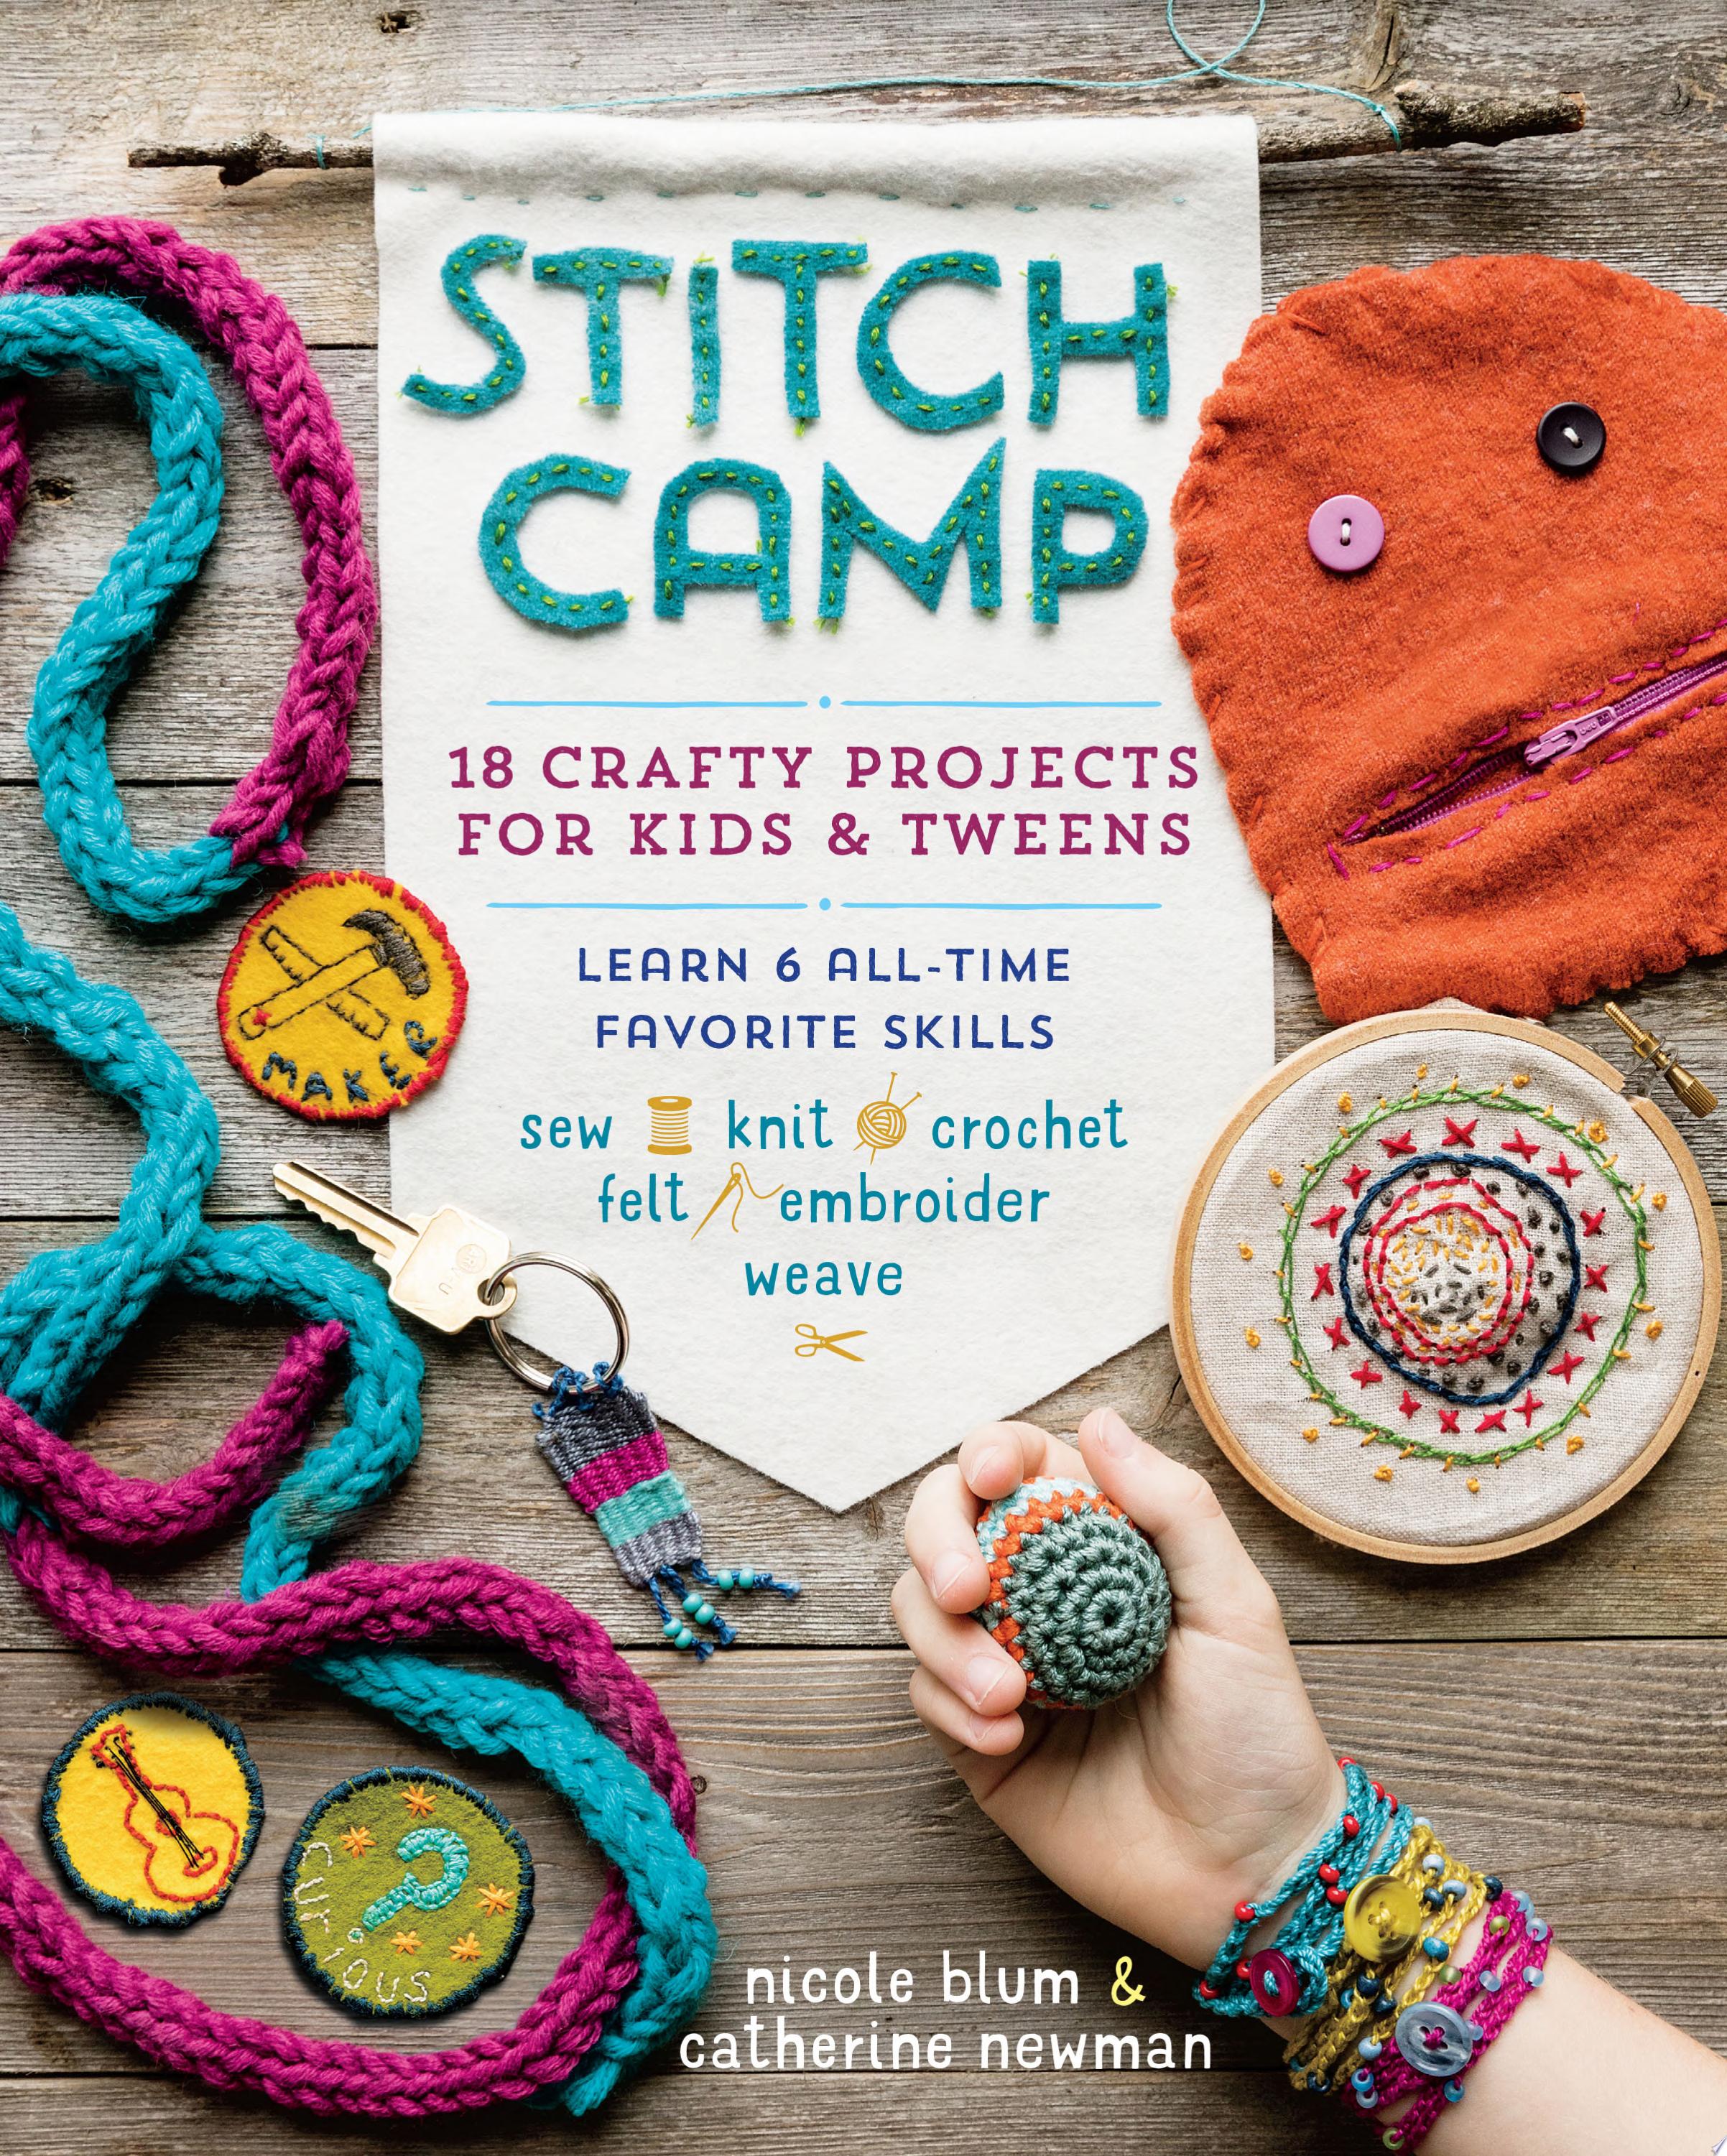 Image for "Stitch Camp"